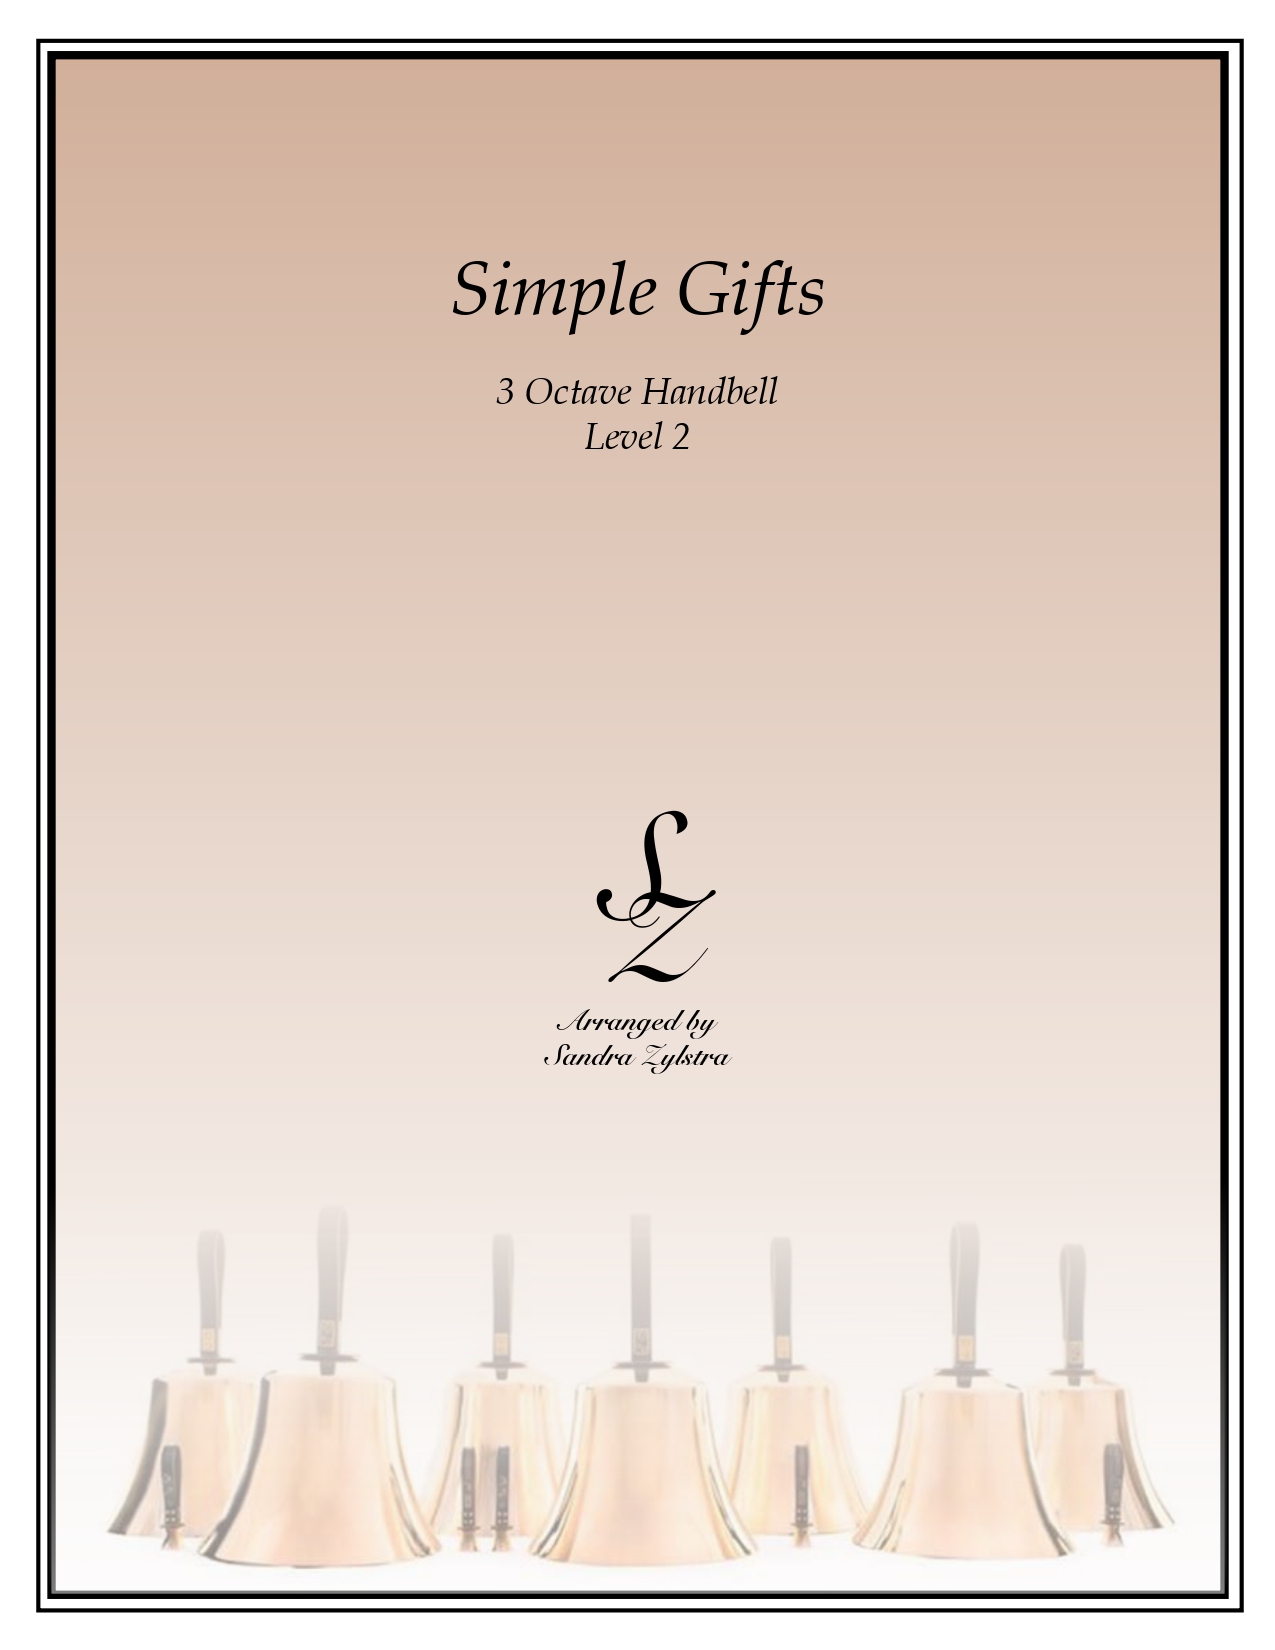 Simple Gifts 3 octave handbells cover page 00011